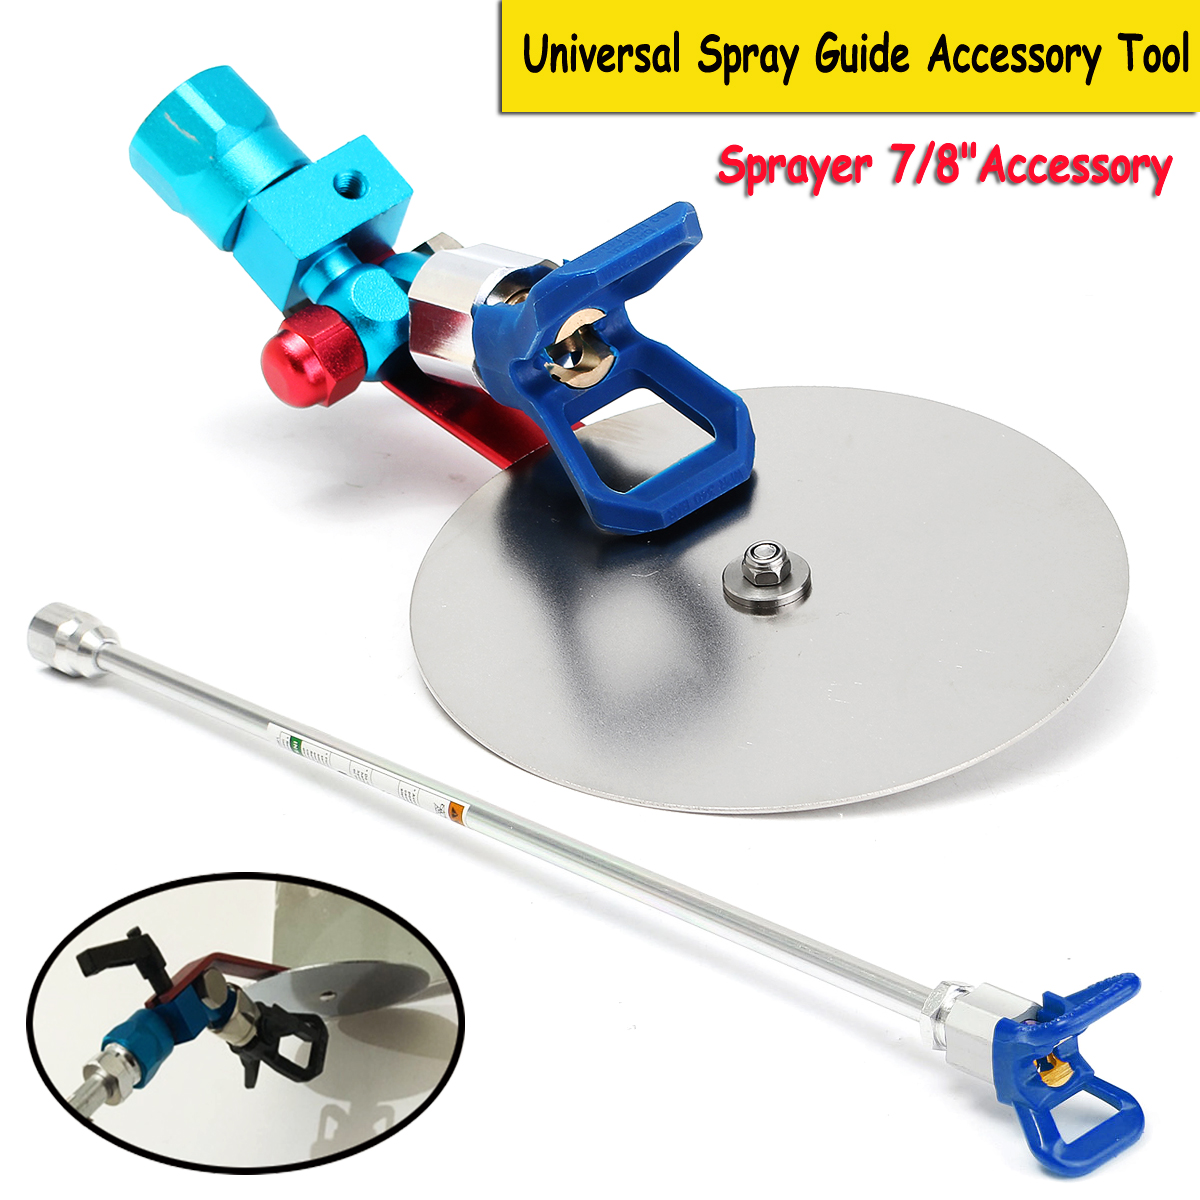 Universal-Spray-Guide-Accessory-Tool-For-Wagner-Titan-Paint-Sprayer-78quot-1252737